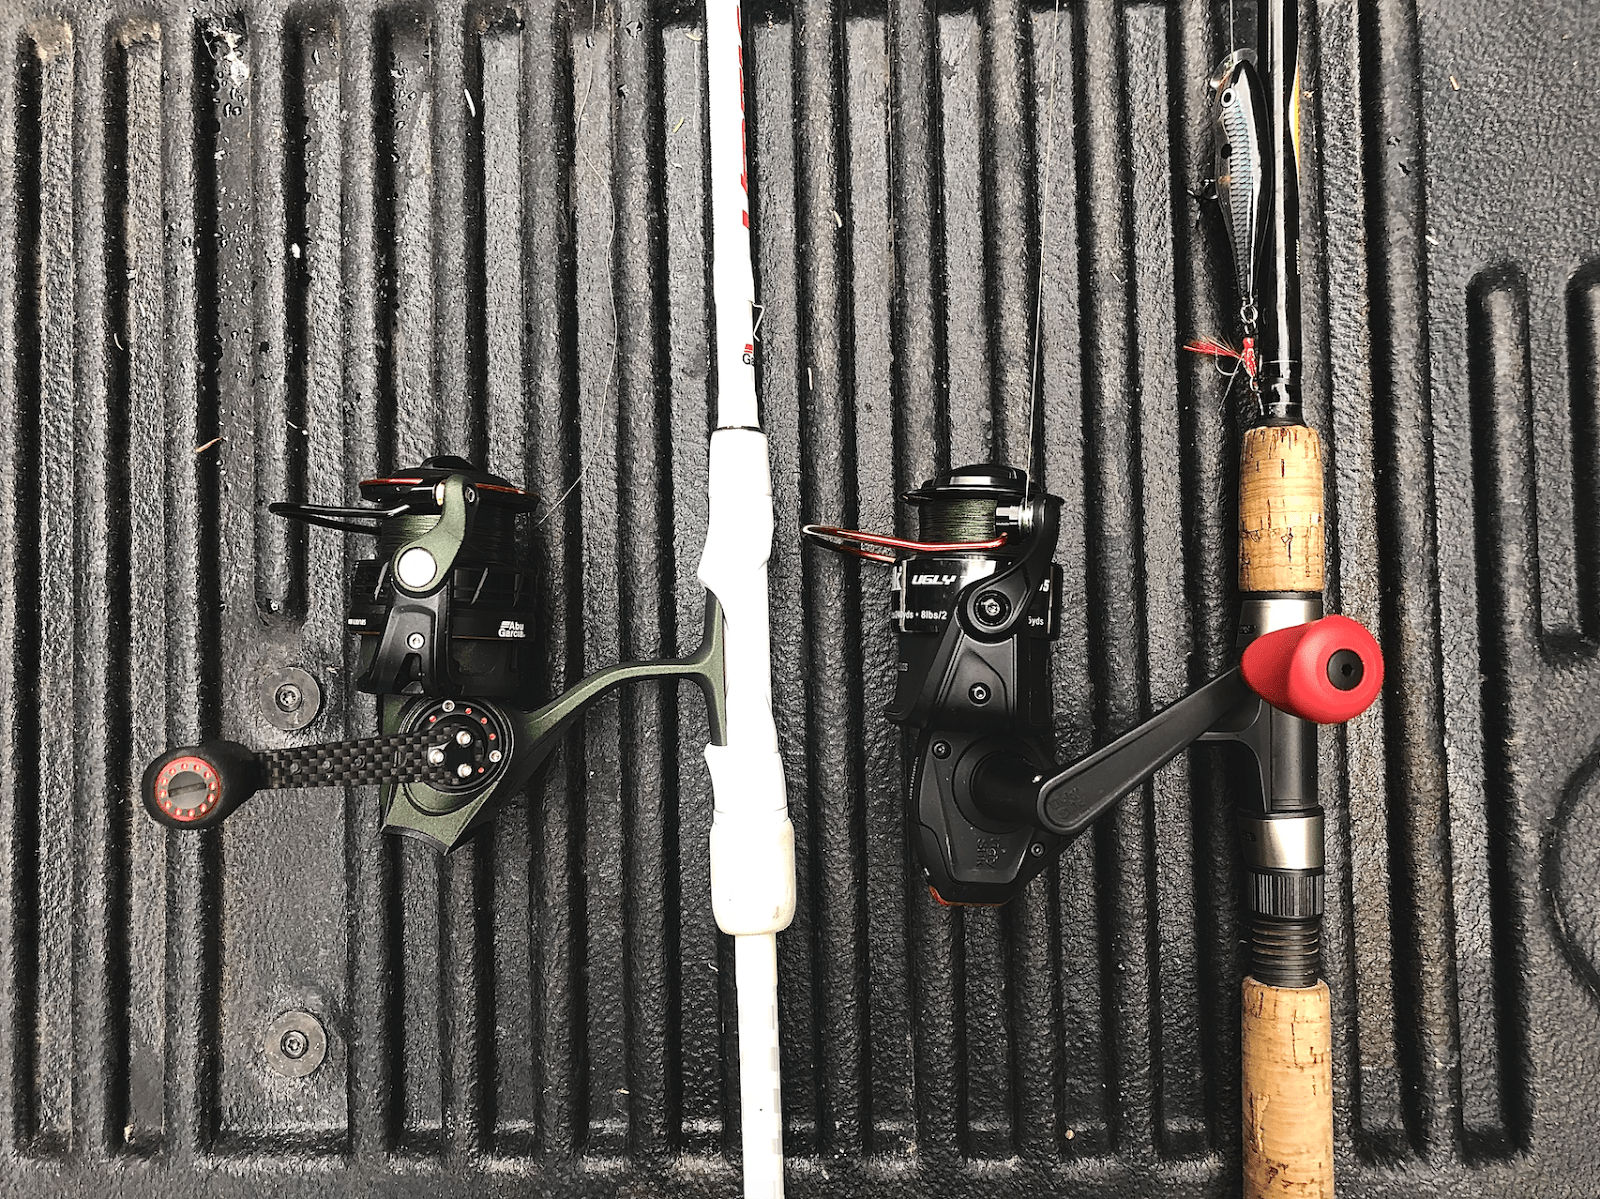 Abu Garcia Zata fishing reel on the left and the Ugly Stik Ugly Tuff reel on the right